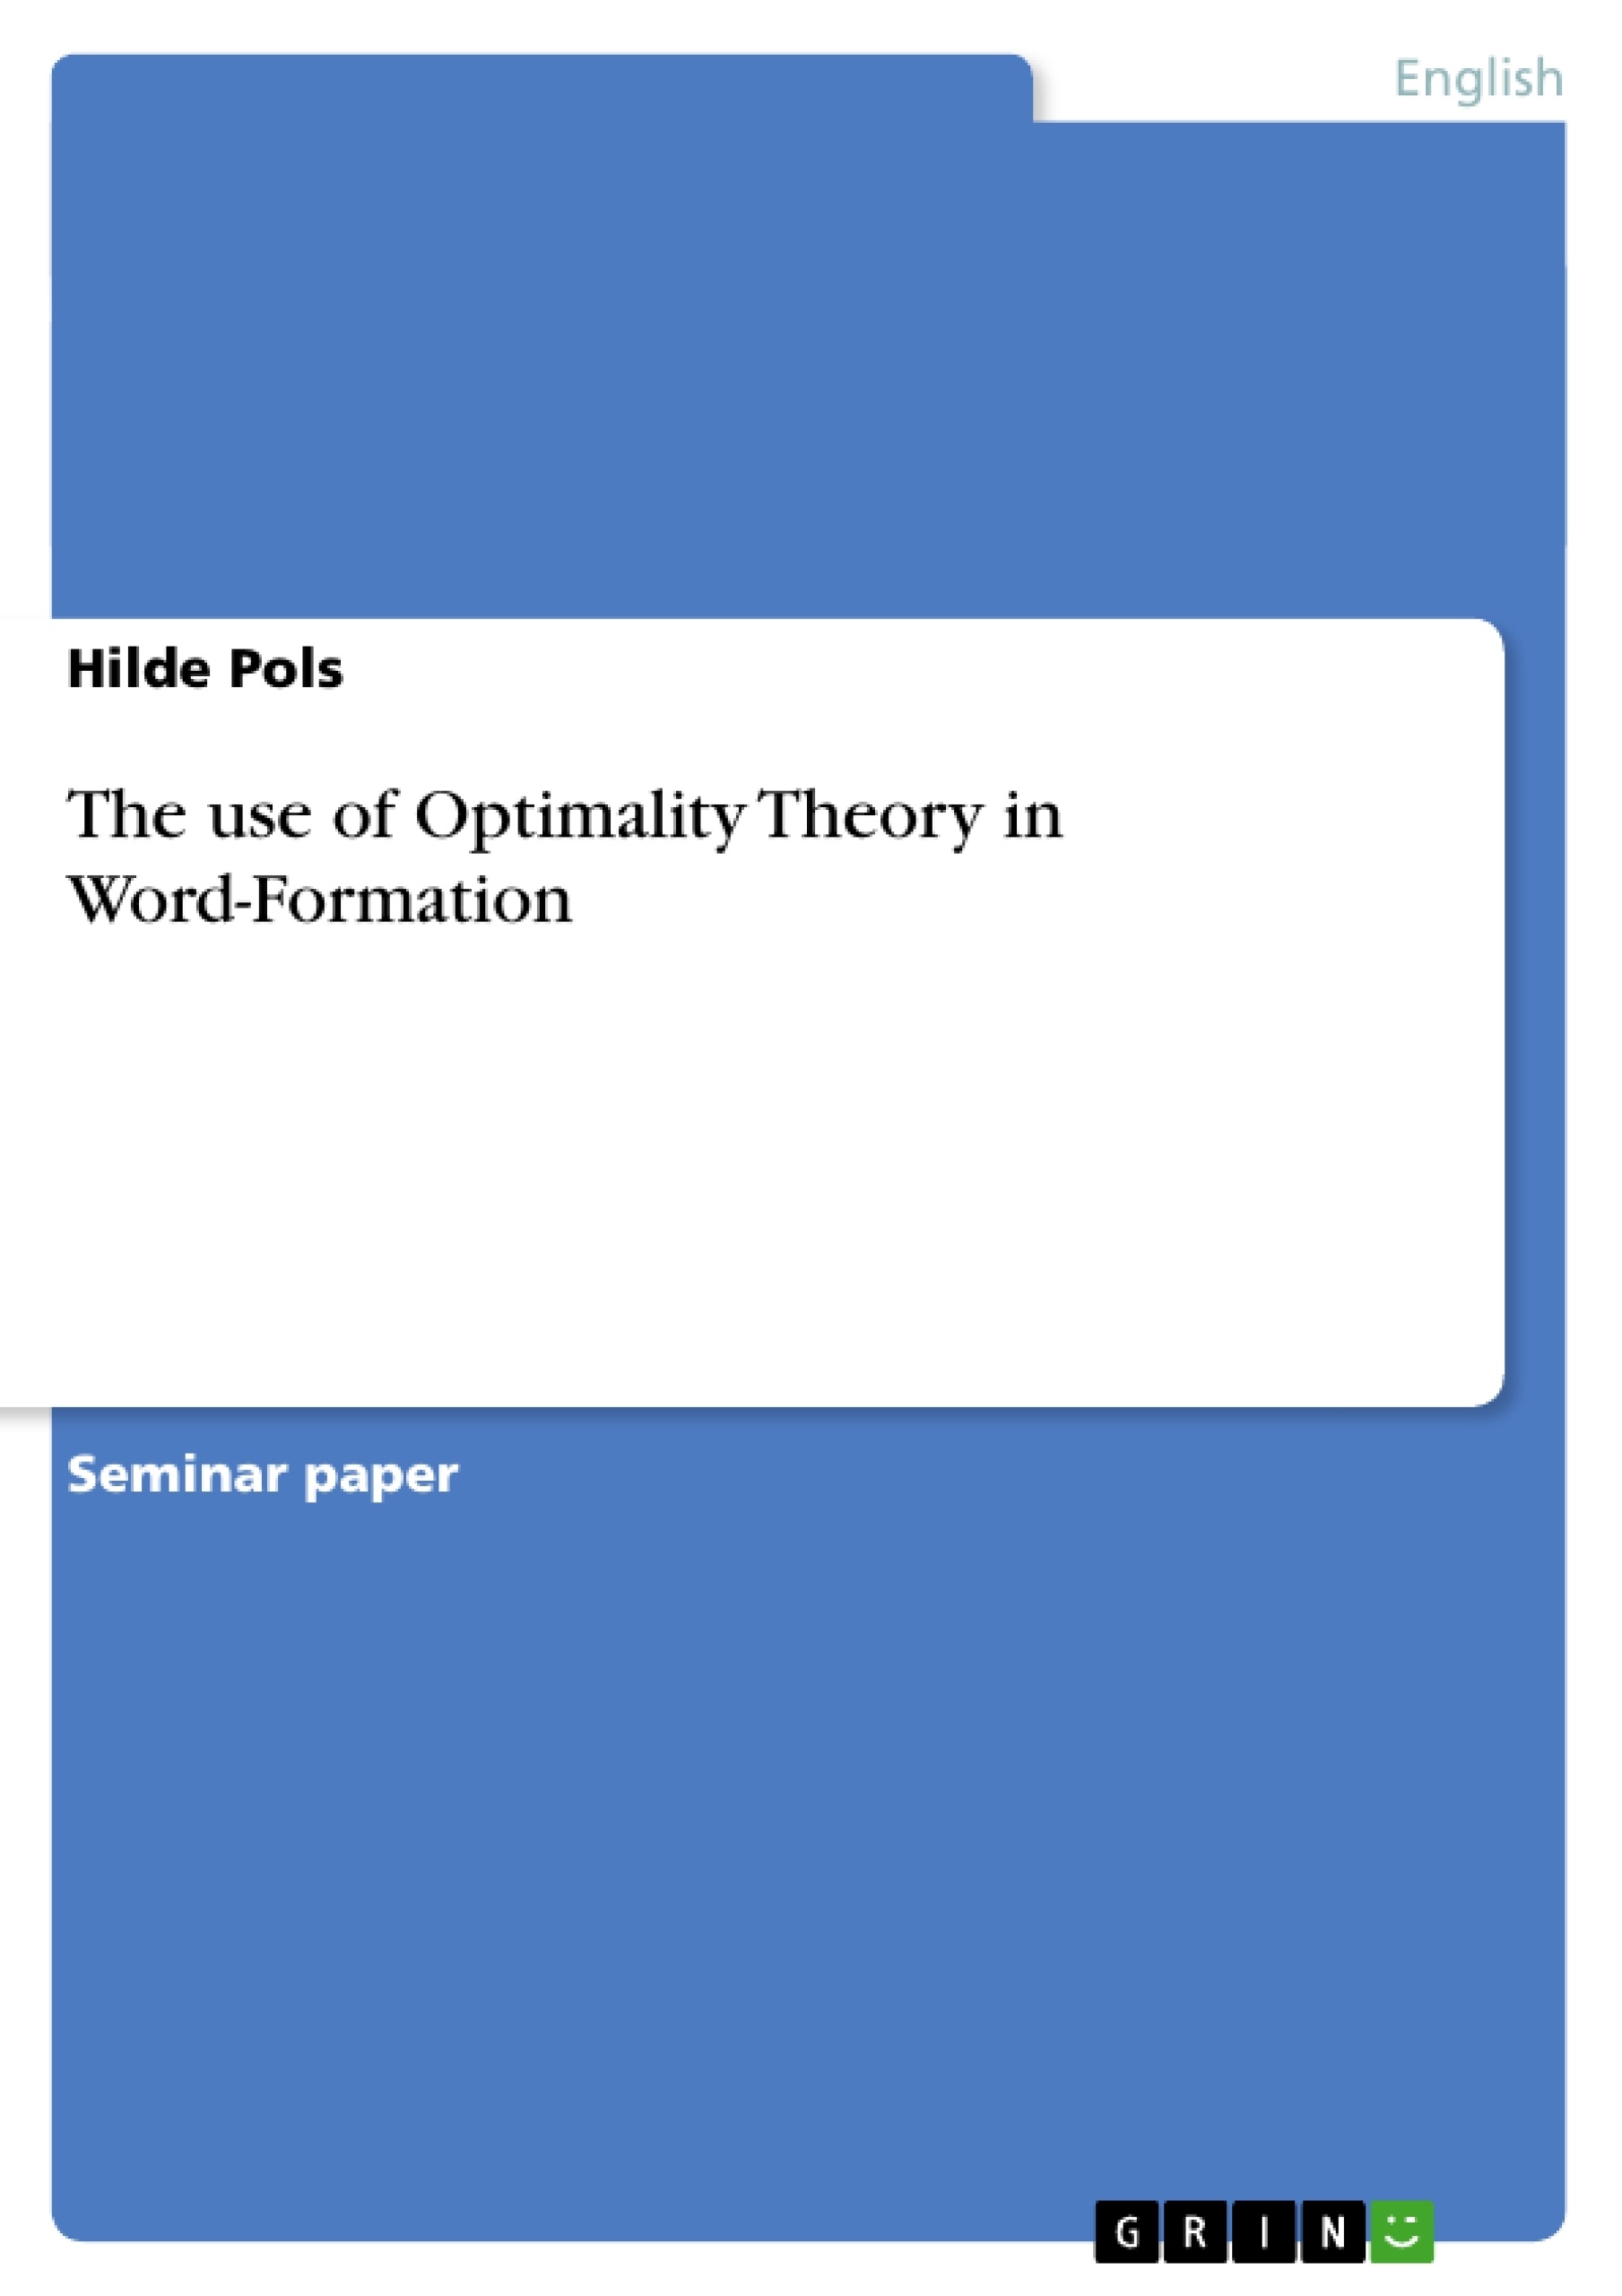 Título: The use of Optimality Theory in Word-Formation